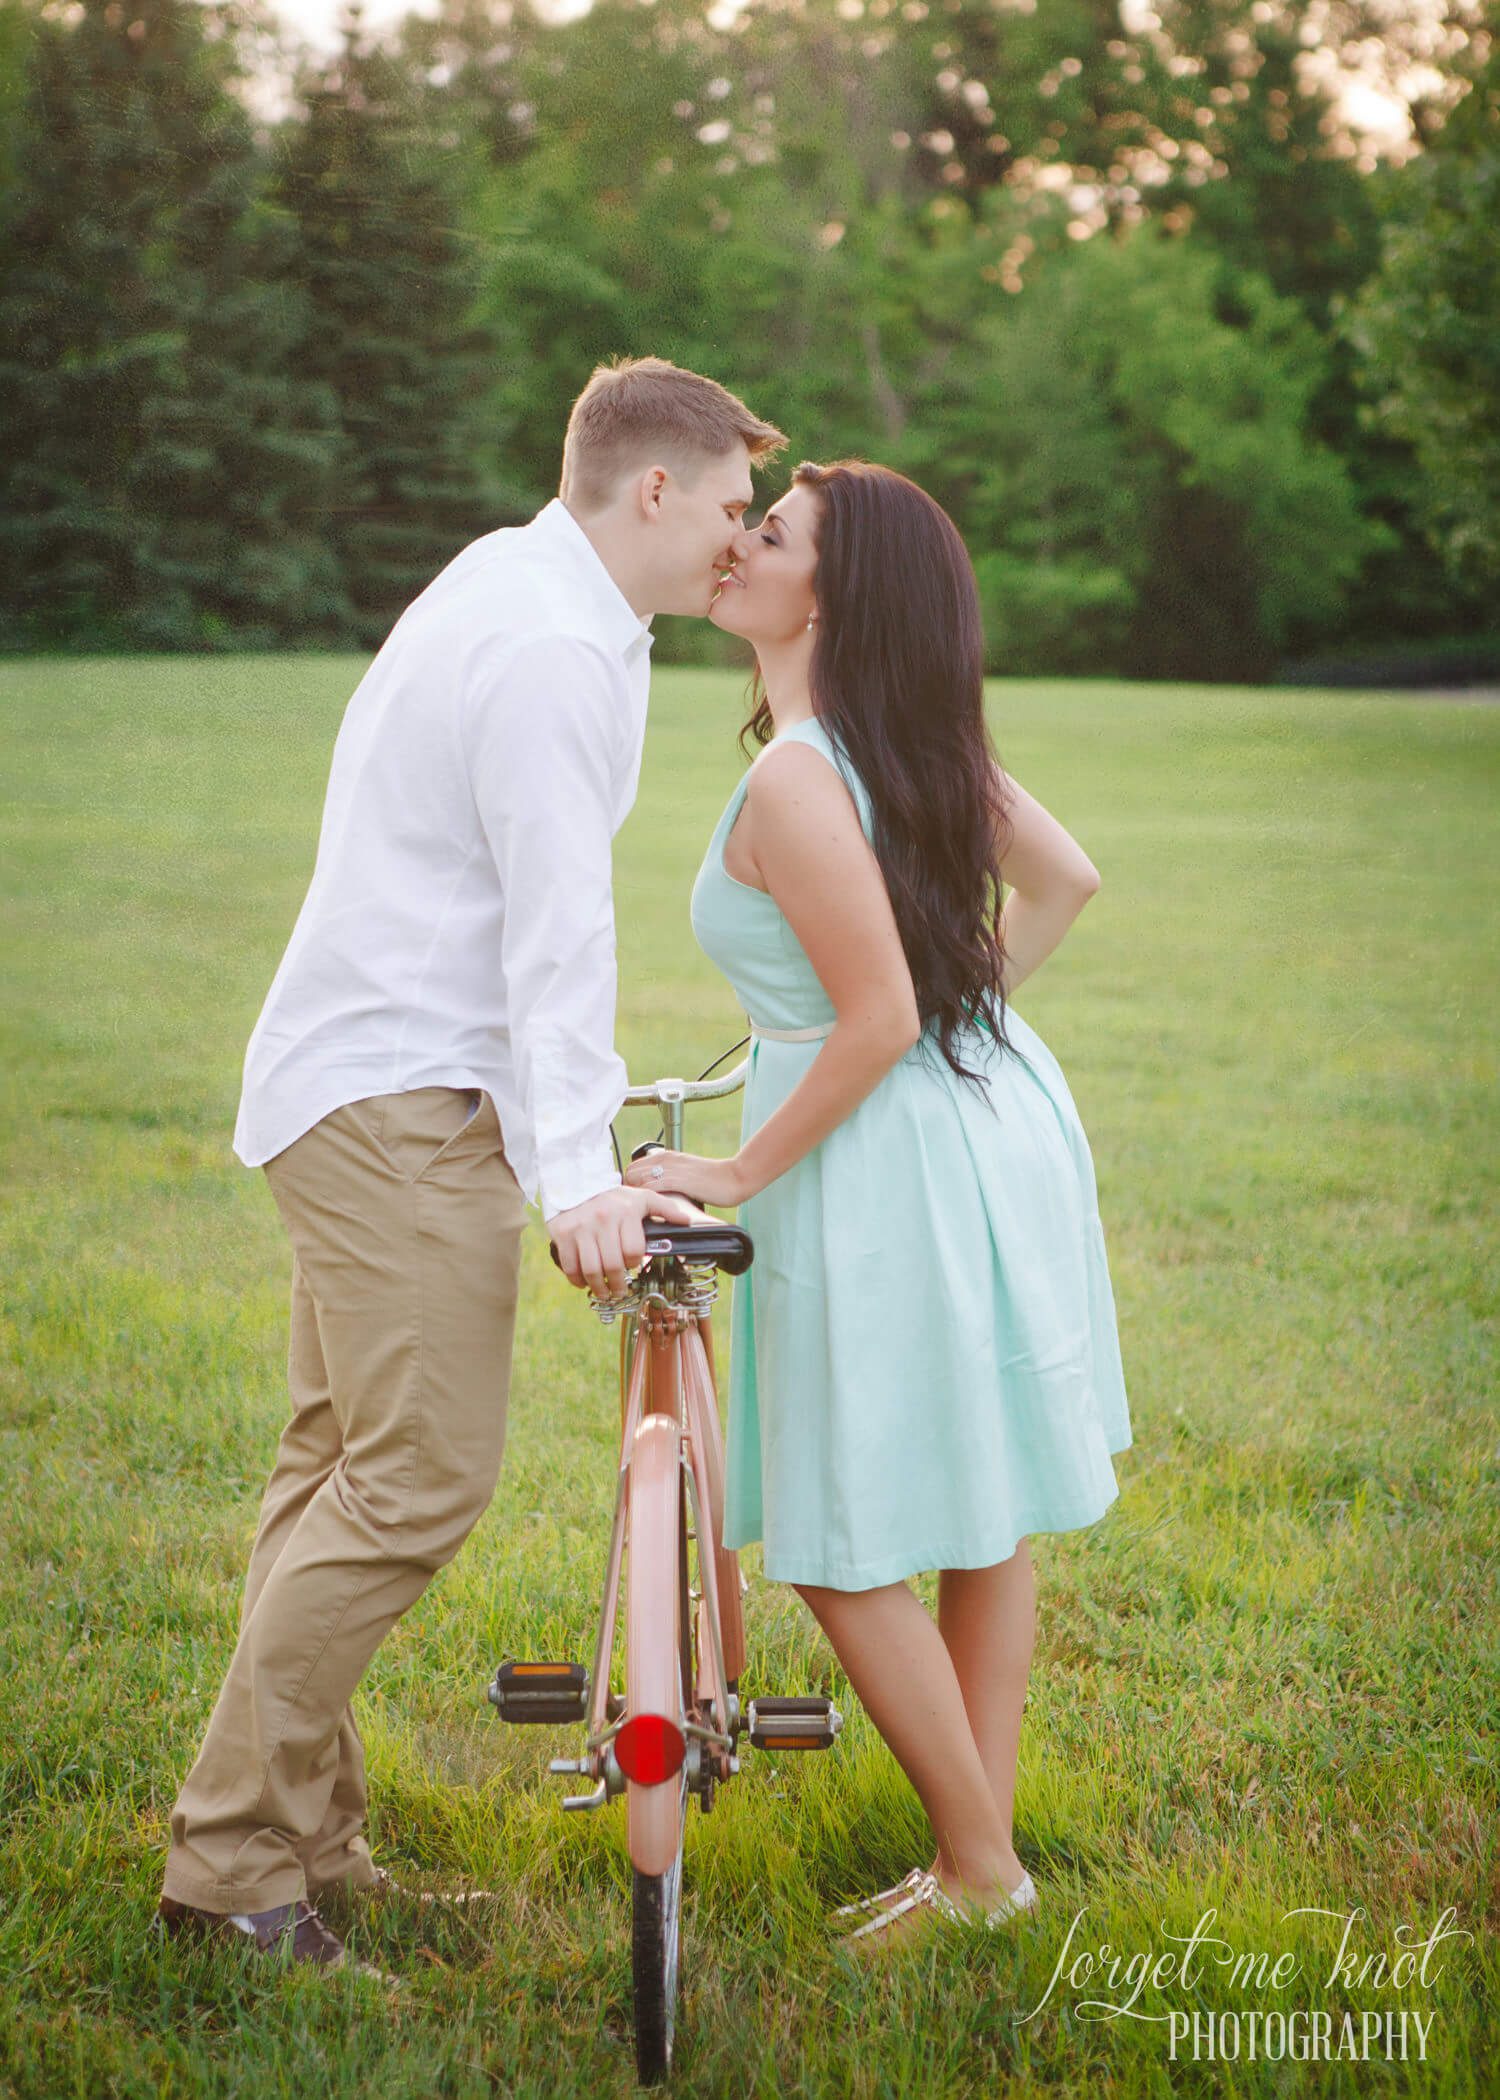 Vintage Engagement Photography session of couple kissing over vintage bicycle